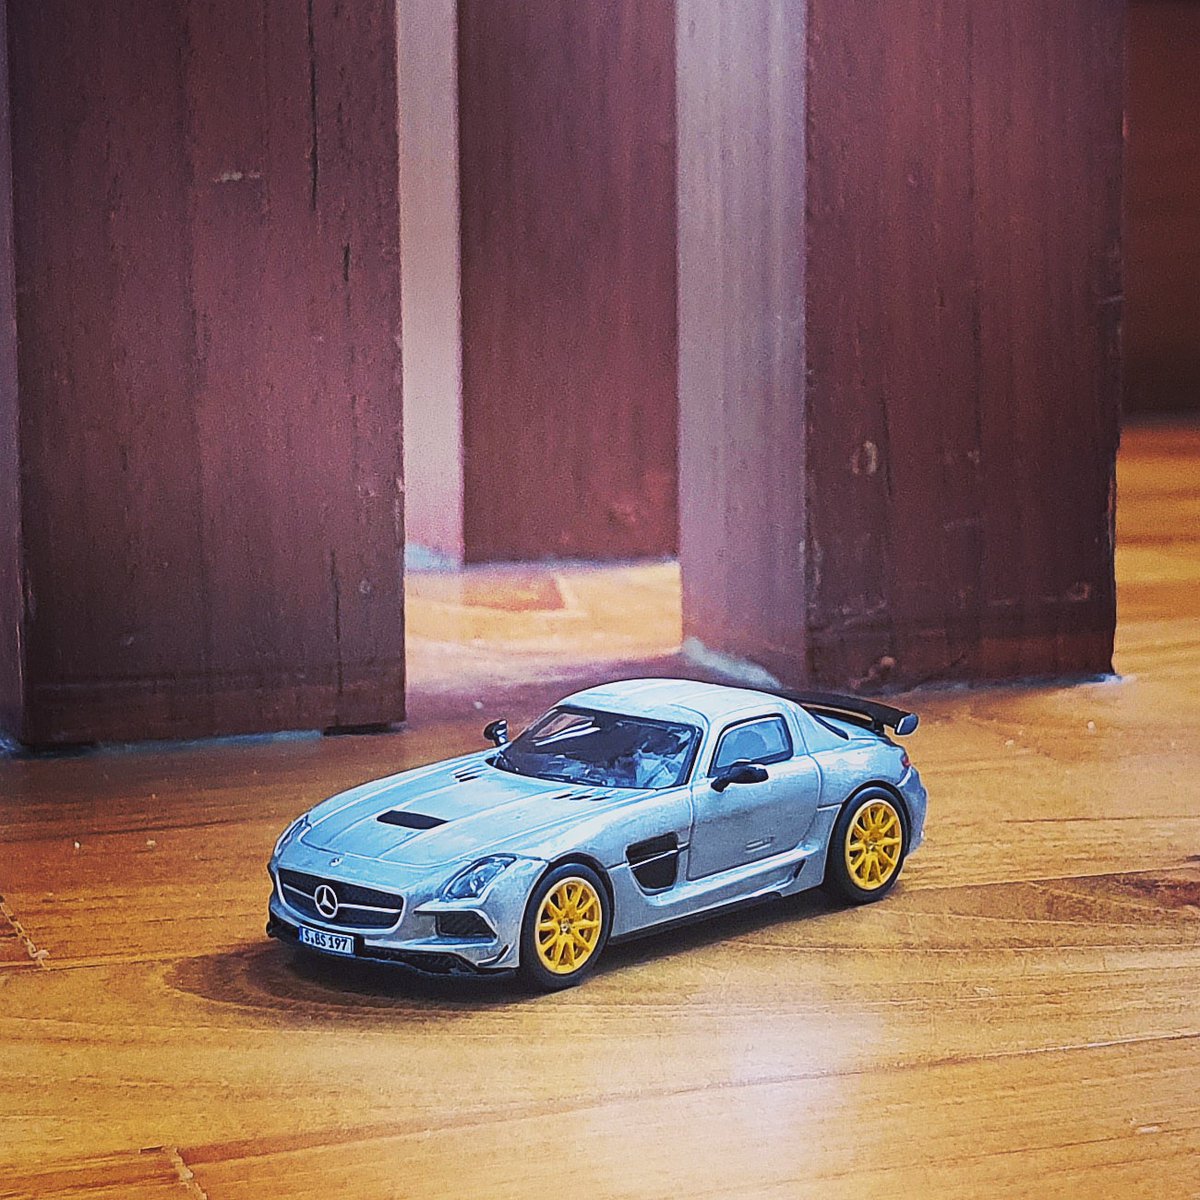 The #MercedesBenz SLS AMG Coupé Black Series. Perfection and radiance from every angle.

#diecast #diecastphotography #tarmacworks #slsamgblackseries